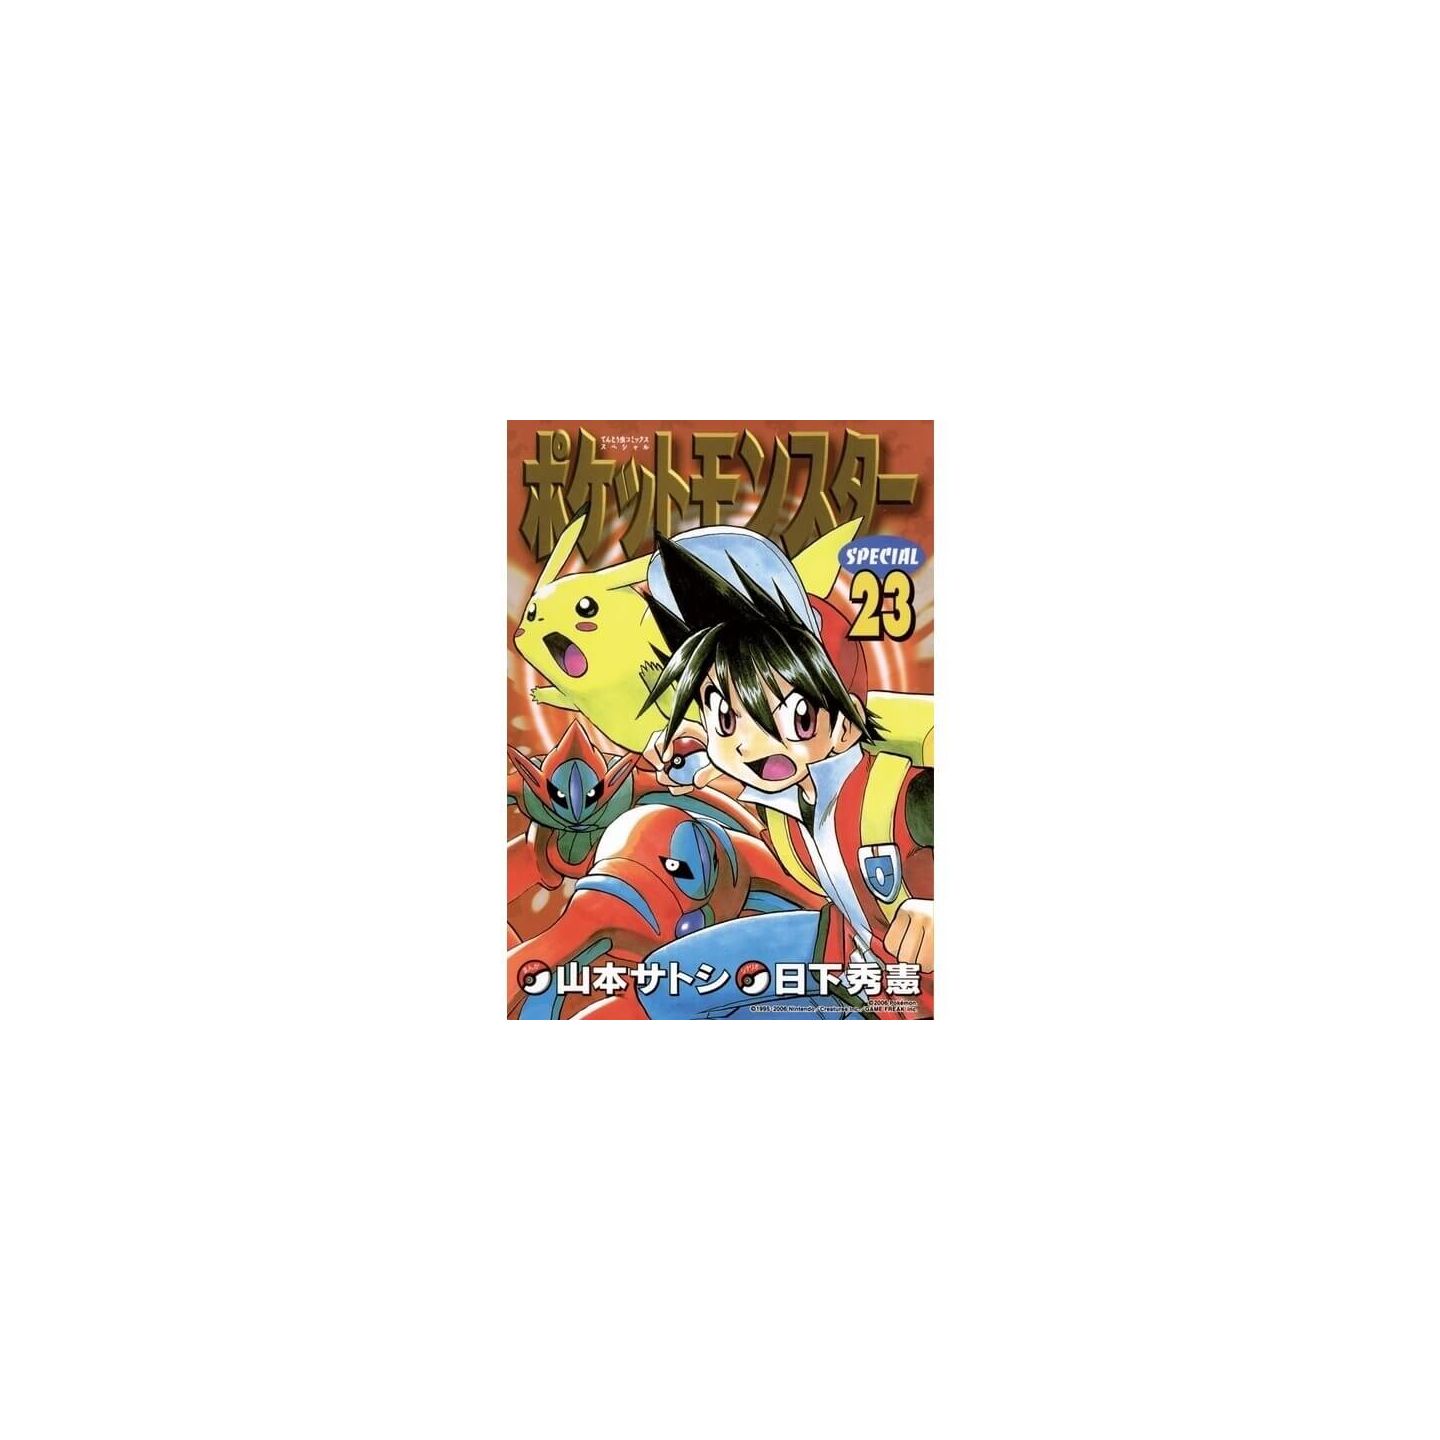 Pokémon Adventures (FireRed and LeafGreen), Vol. 23 (Paperback)